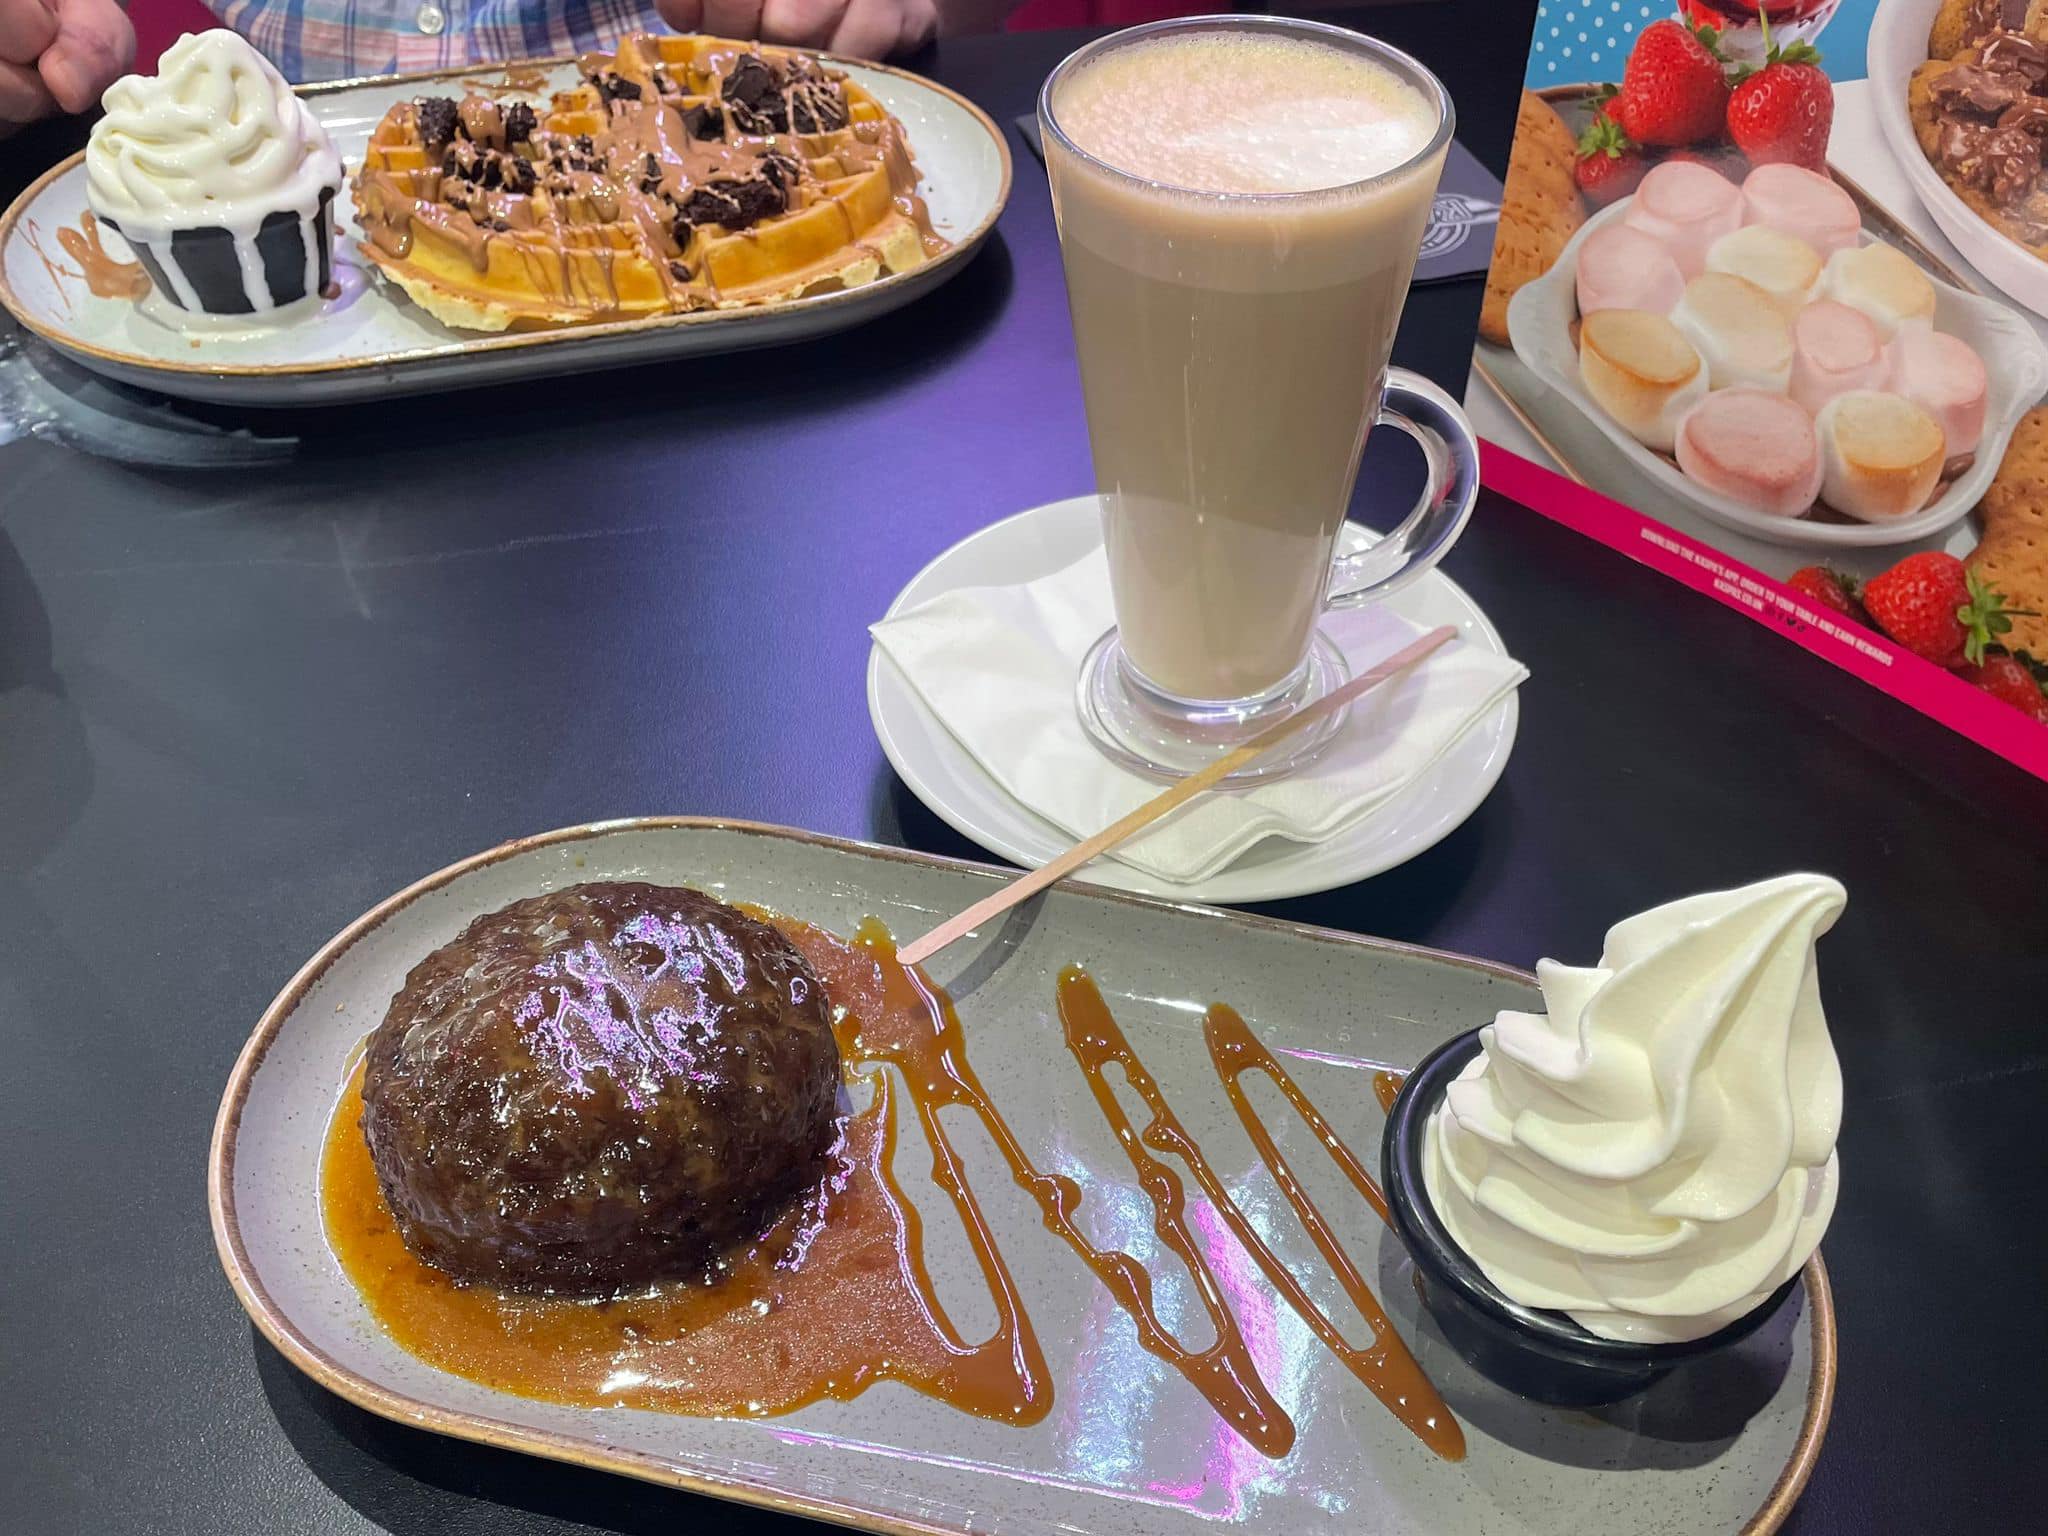 Kaspa's Desserts has opened at Ocean Plaza Leisure in Southport. Photo by Andrew Brown Stand Up For Southport 